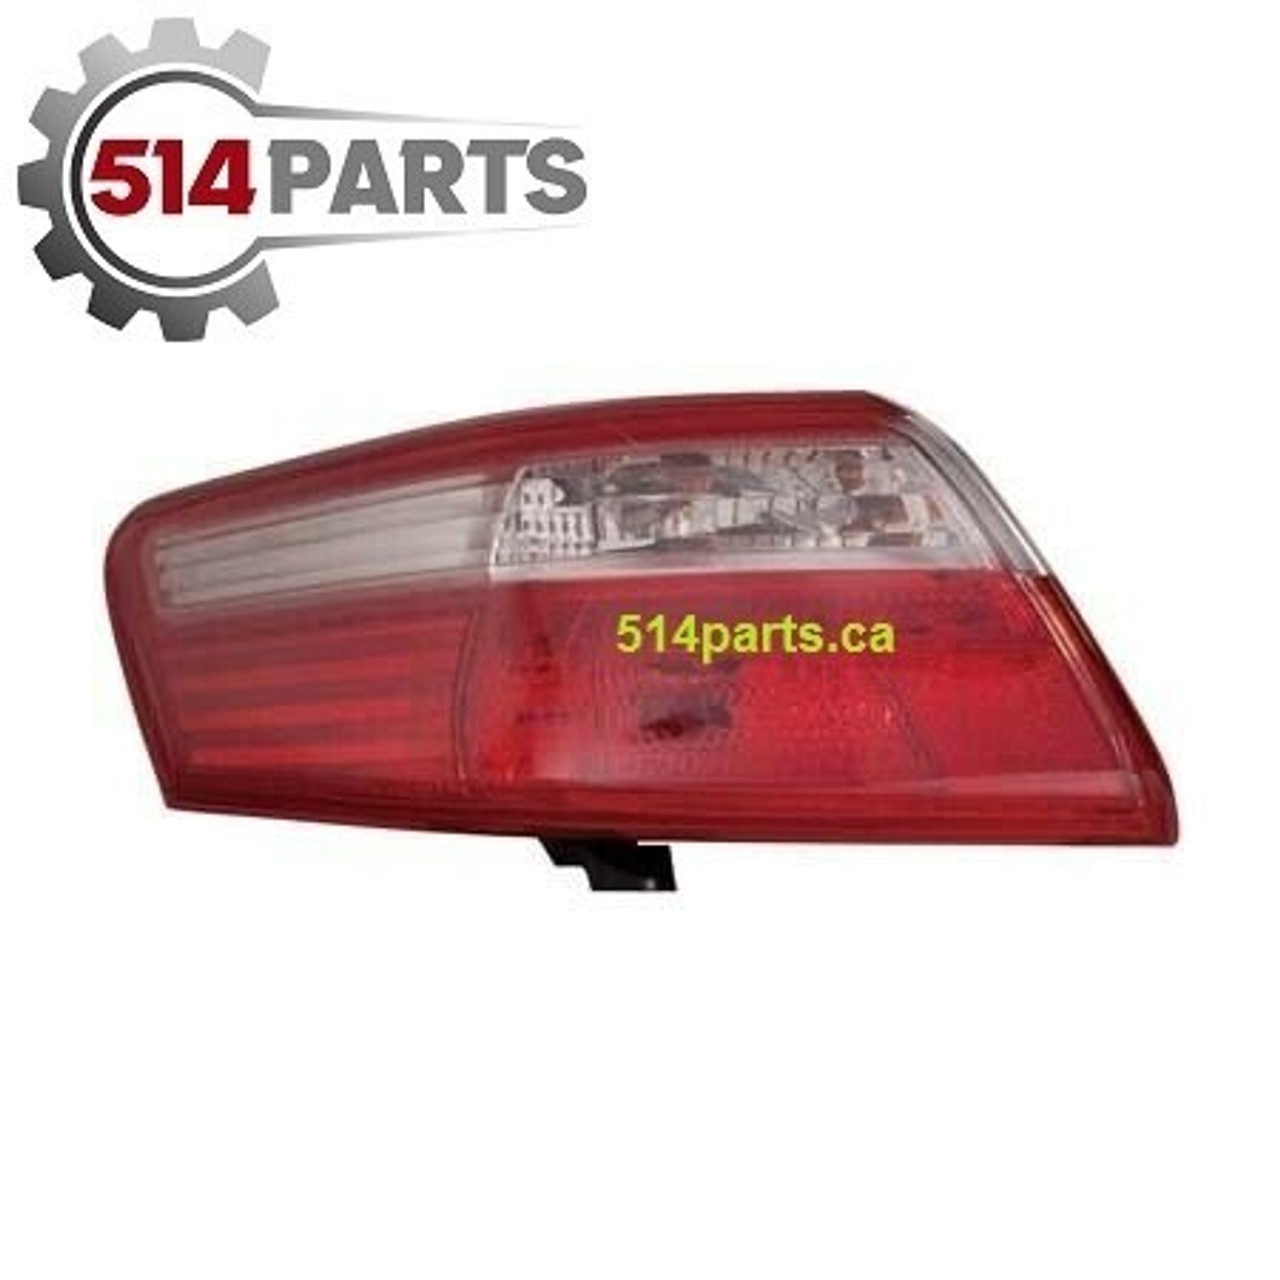 2007 - 2009 TOYOTA CAMRY USA BUILT MODELS TAIL LIGHTS High Quality - PHARES ARRIERE Haute Qualite